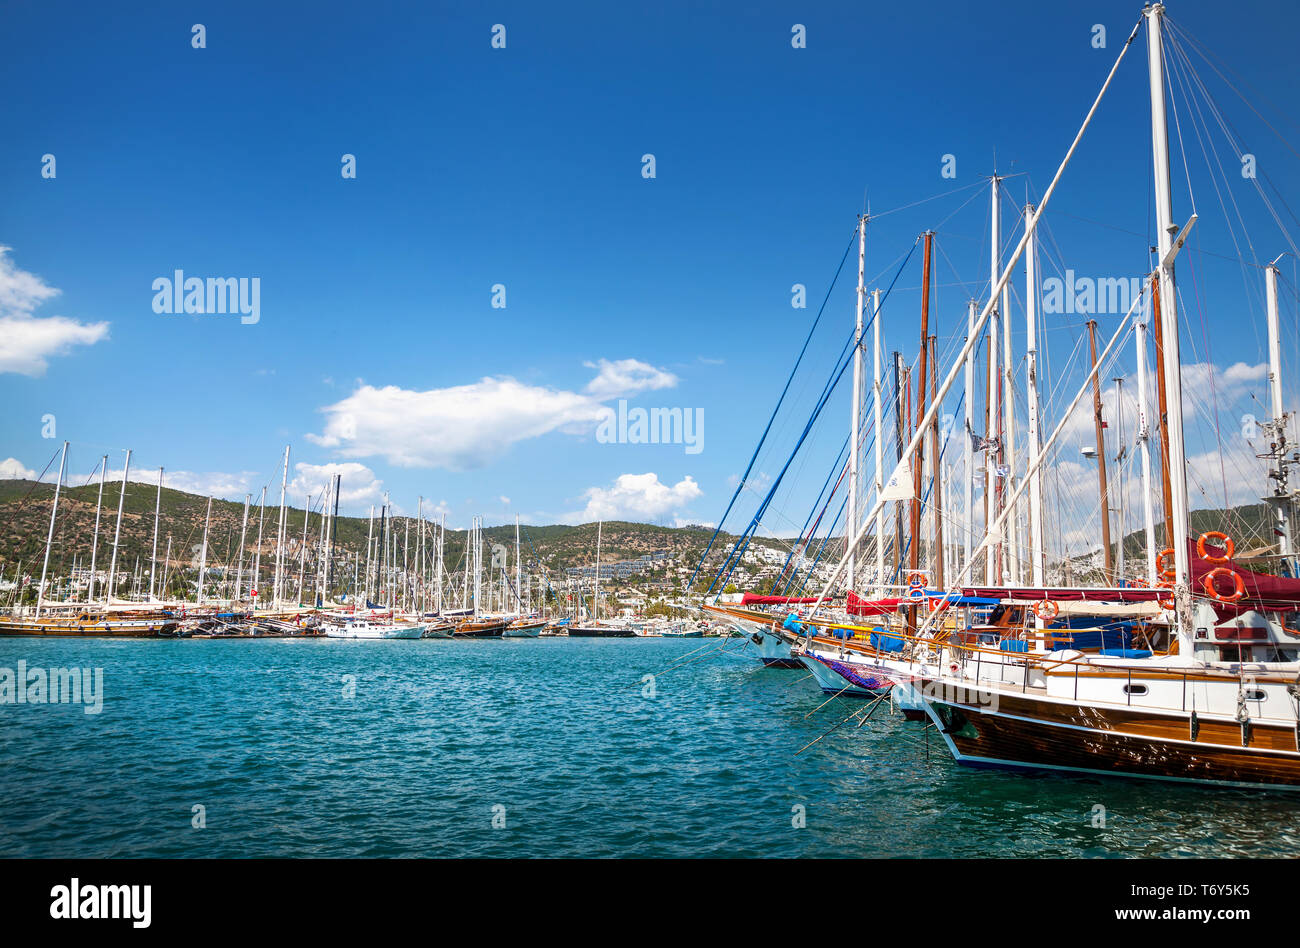 Harbor with boats in Aegean Sea in tropical Bodrum in sunny day, Turkey Stock Photo